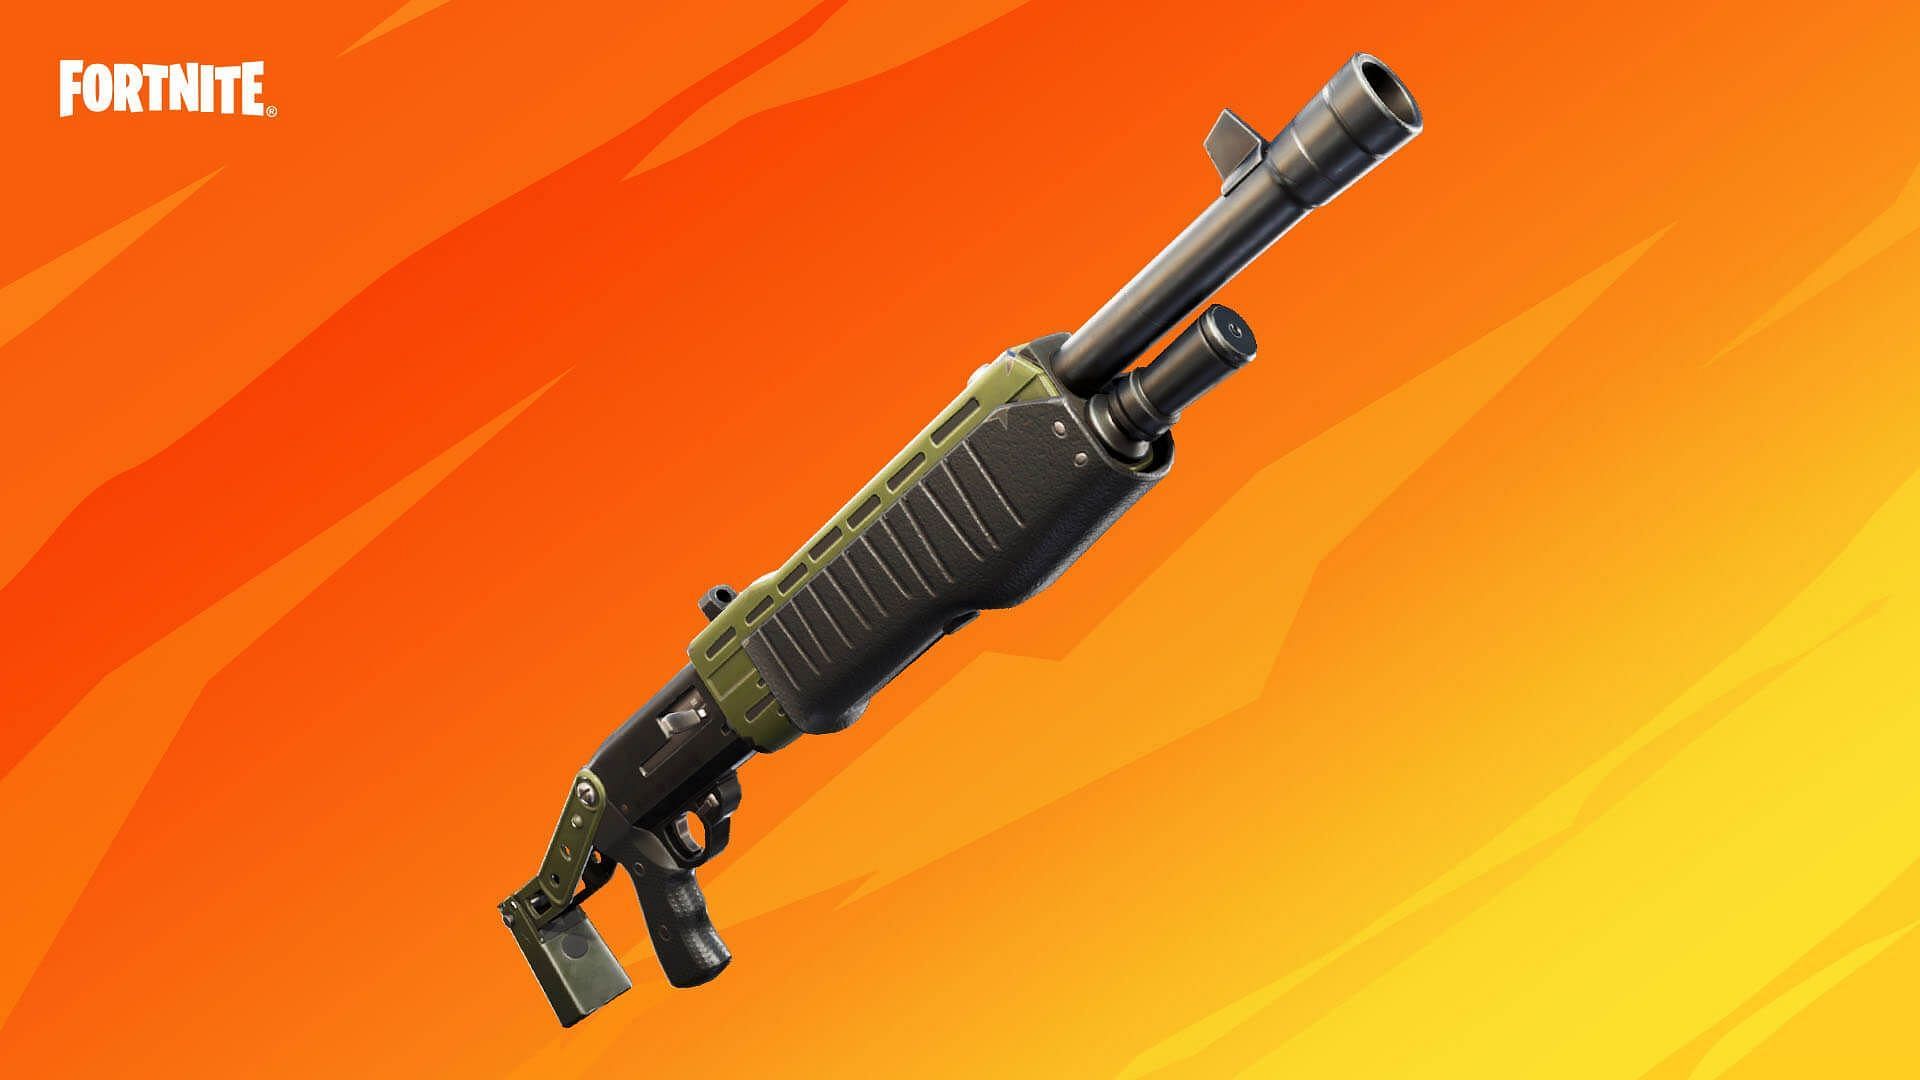 The pump is widely considered the best shotgun in the game. Image via Epic Games